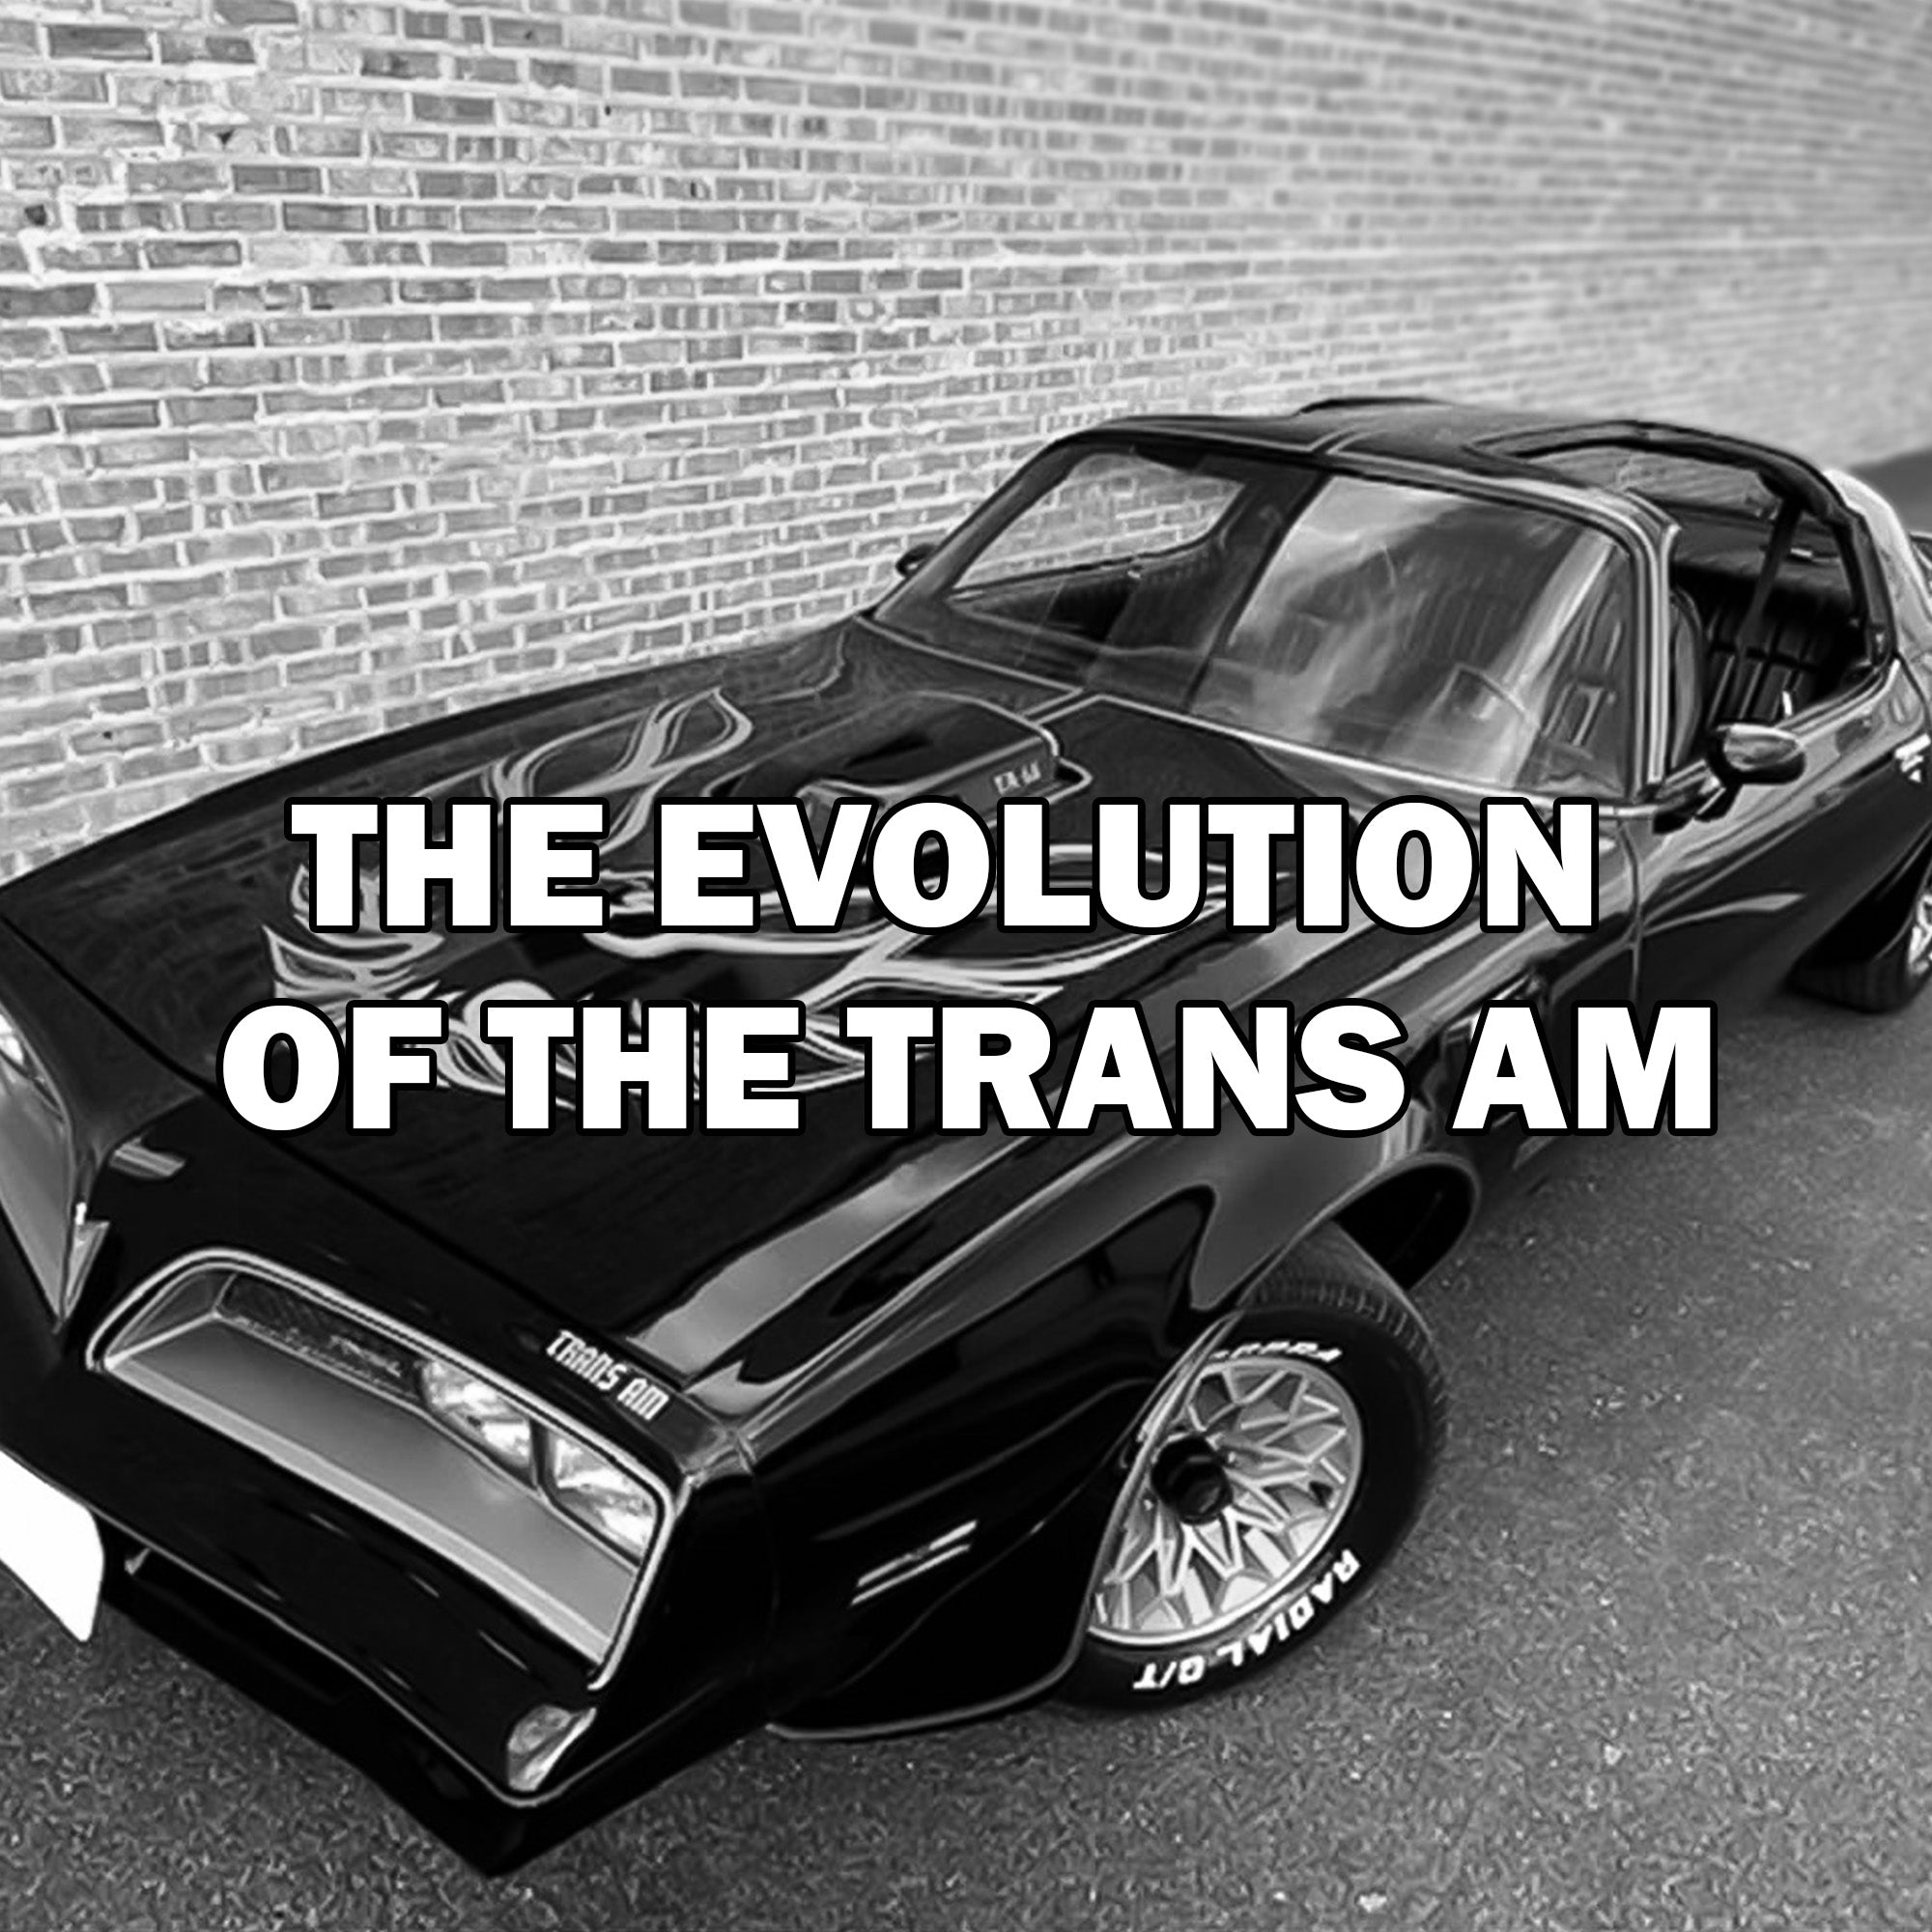 The Evolution of the Trans Am